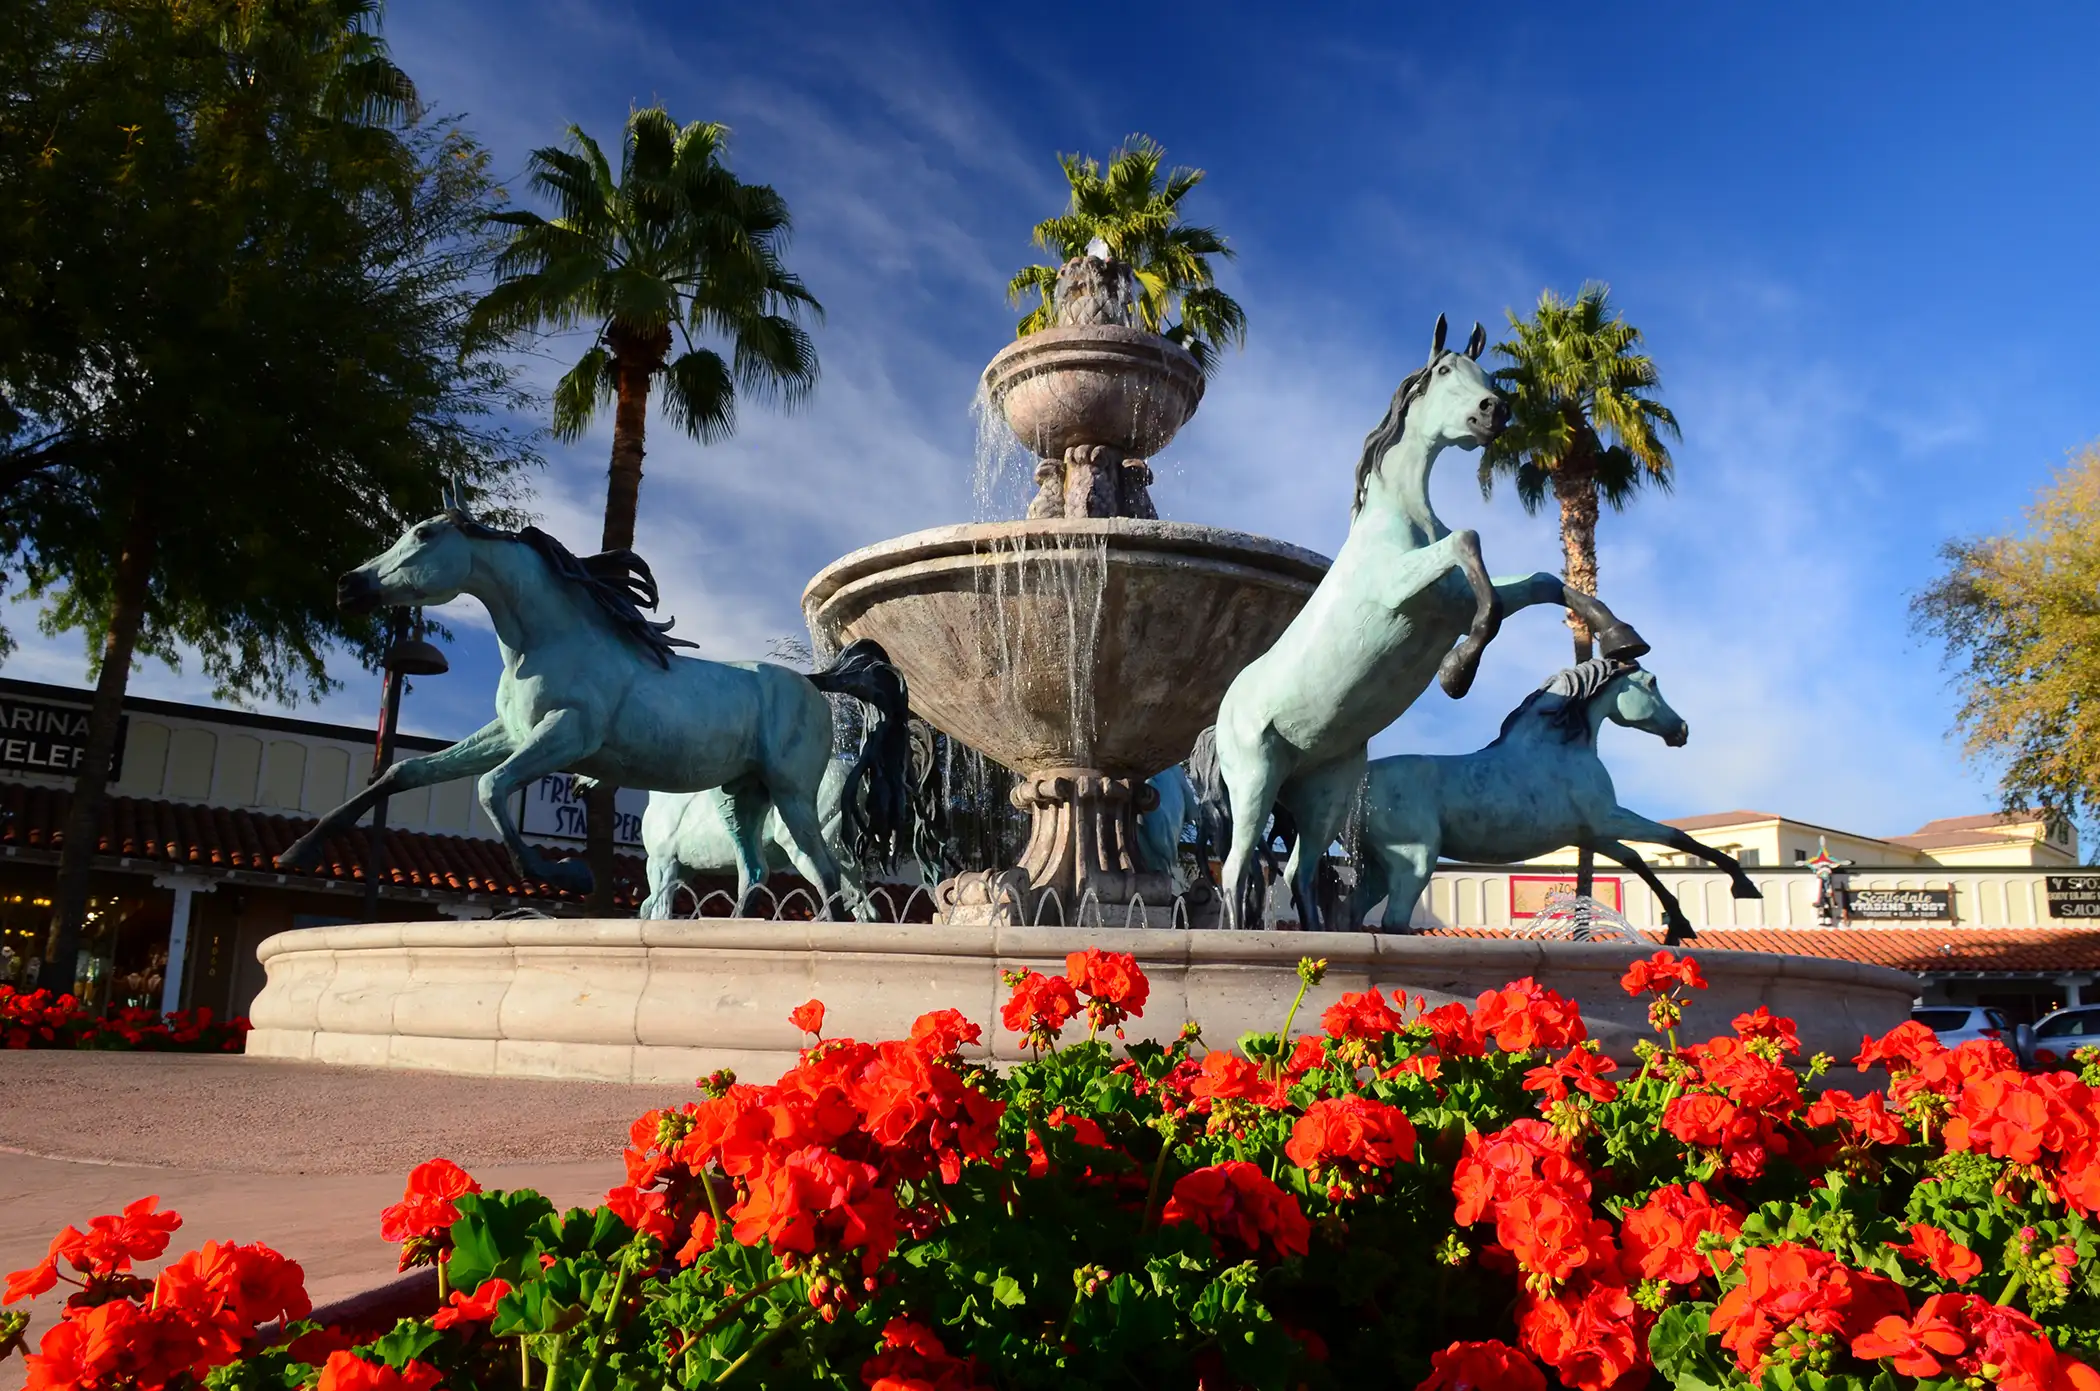 Scottsdale, Arizona. Before you move here, be sure you love golf, spas, and a hot, sunny desert climate. These days, high-end restaurants, bars, galleries and shops are also plentiful around town.